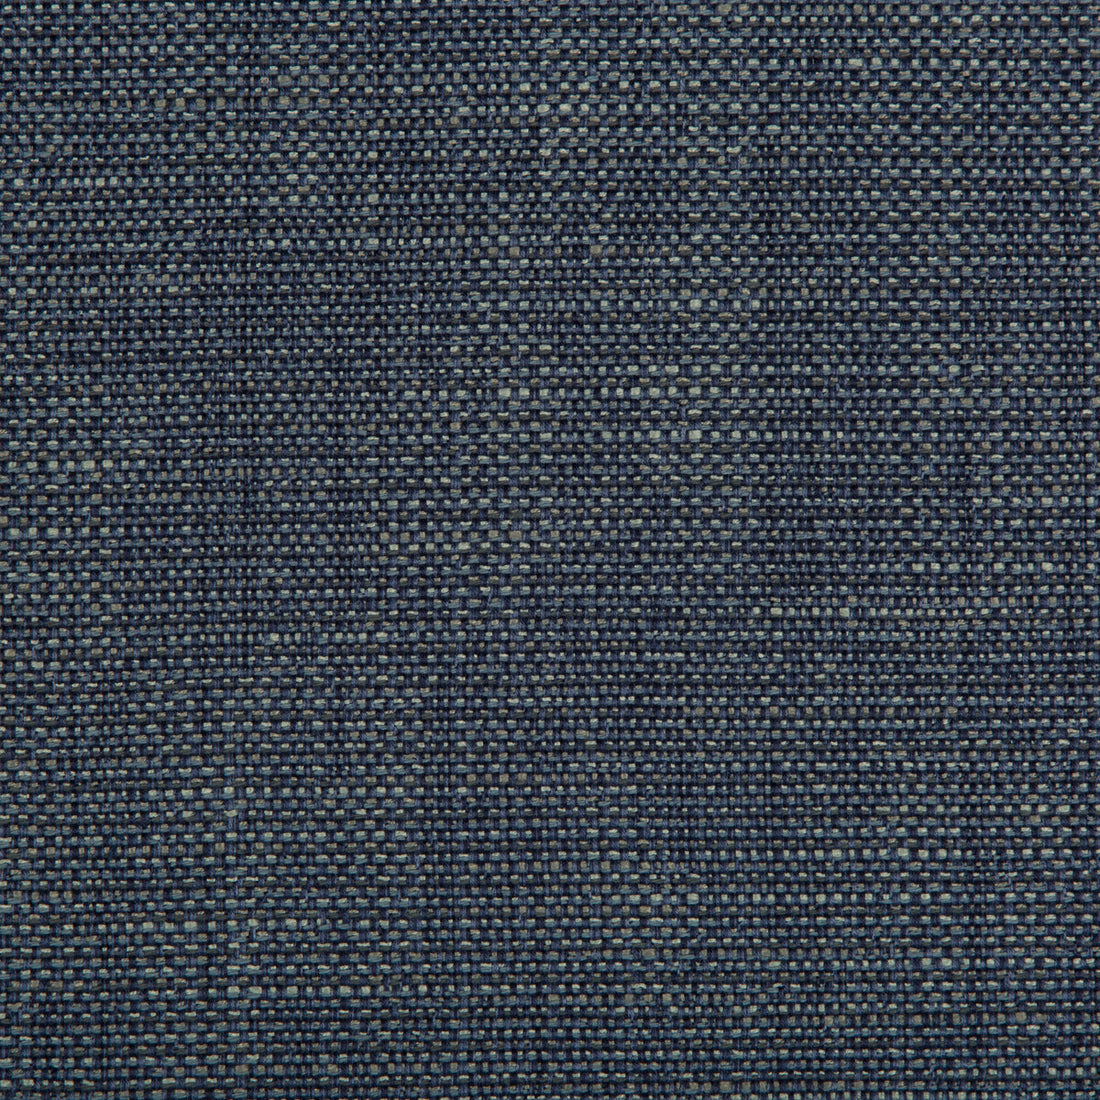 Kravet Contract fabric in 35132-505 color - pattern 35132.505.0 - by Kravet Contract in the Incase Crypton Gis collection